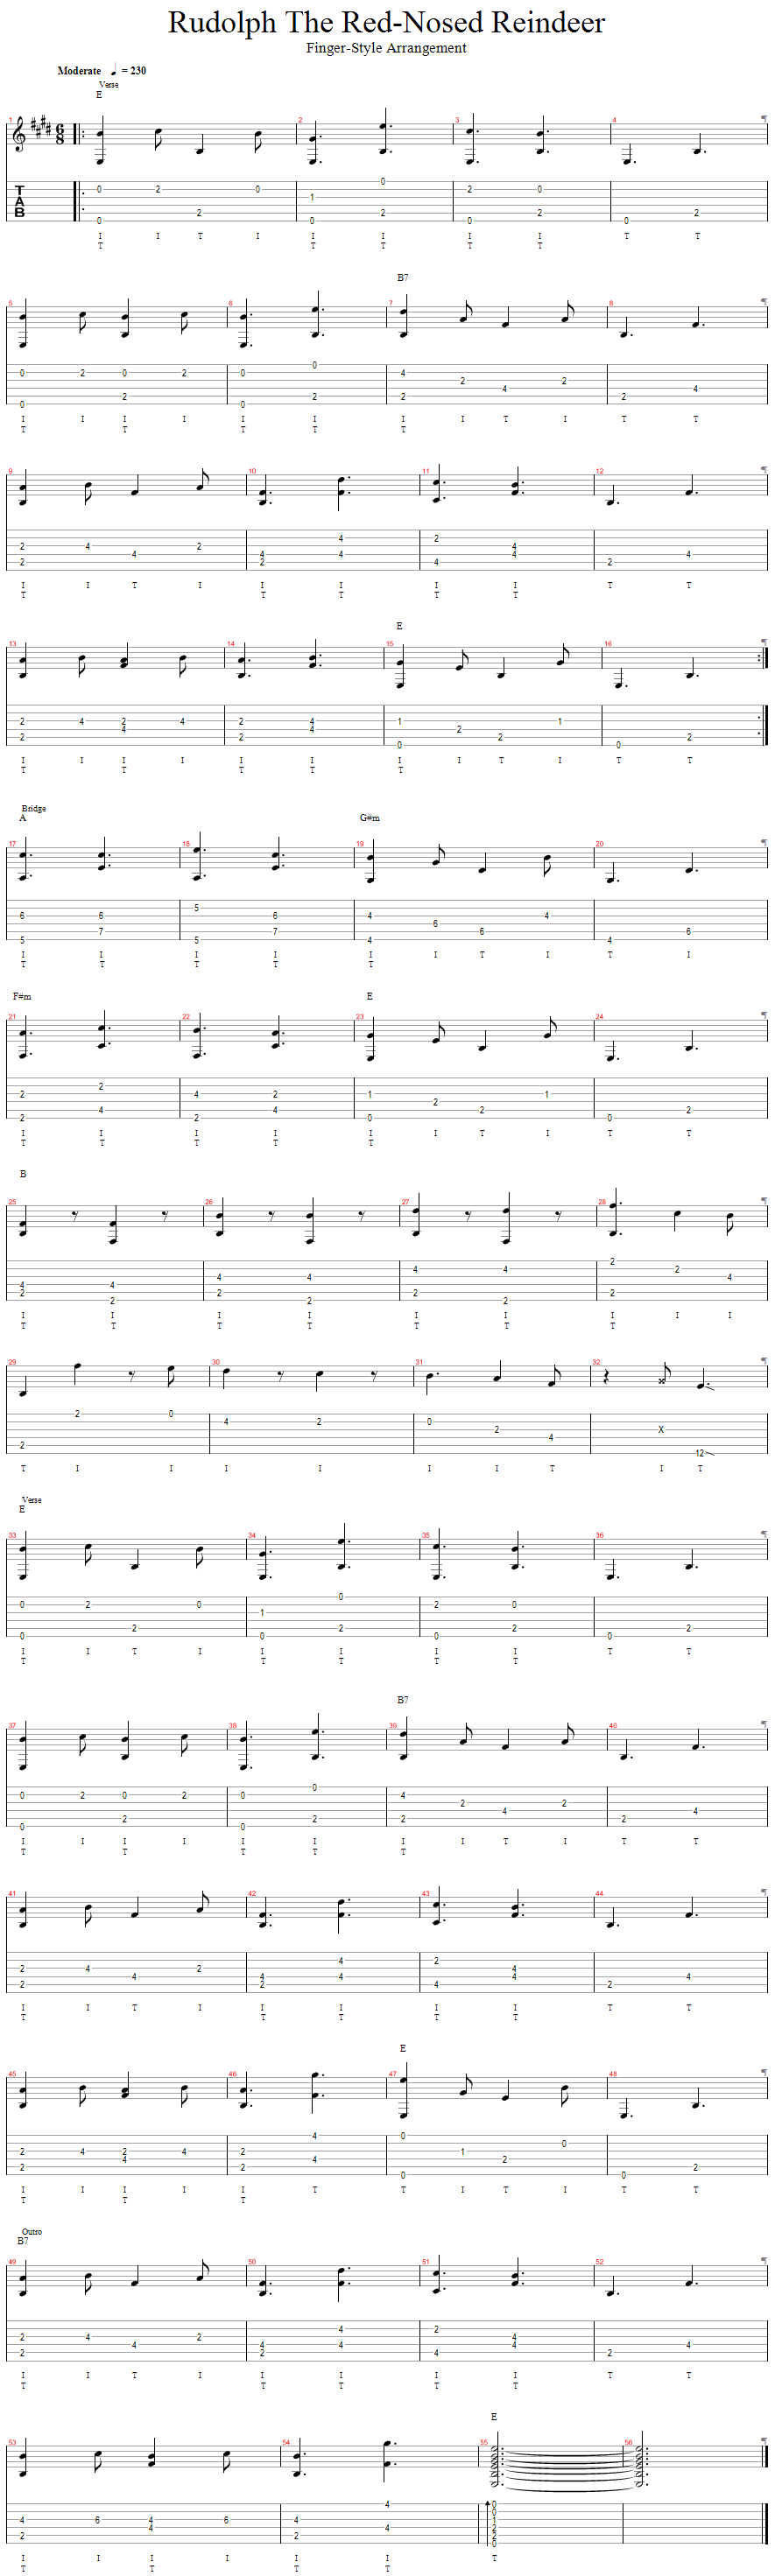 Tablature for A Chet-Style Rudolph - Backing Track